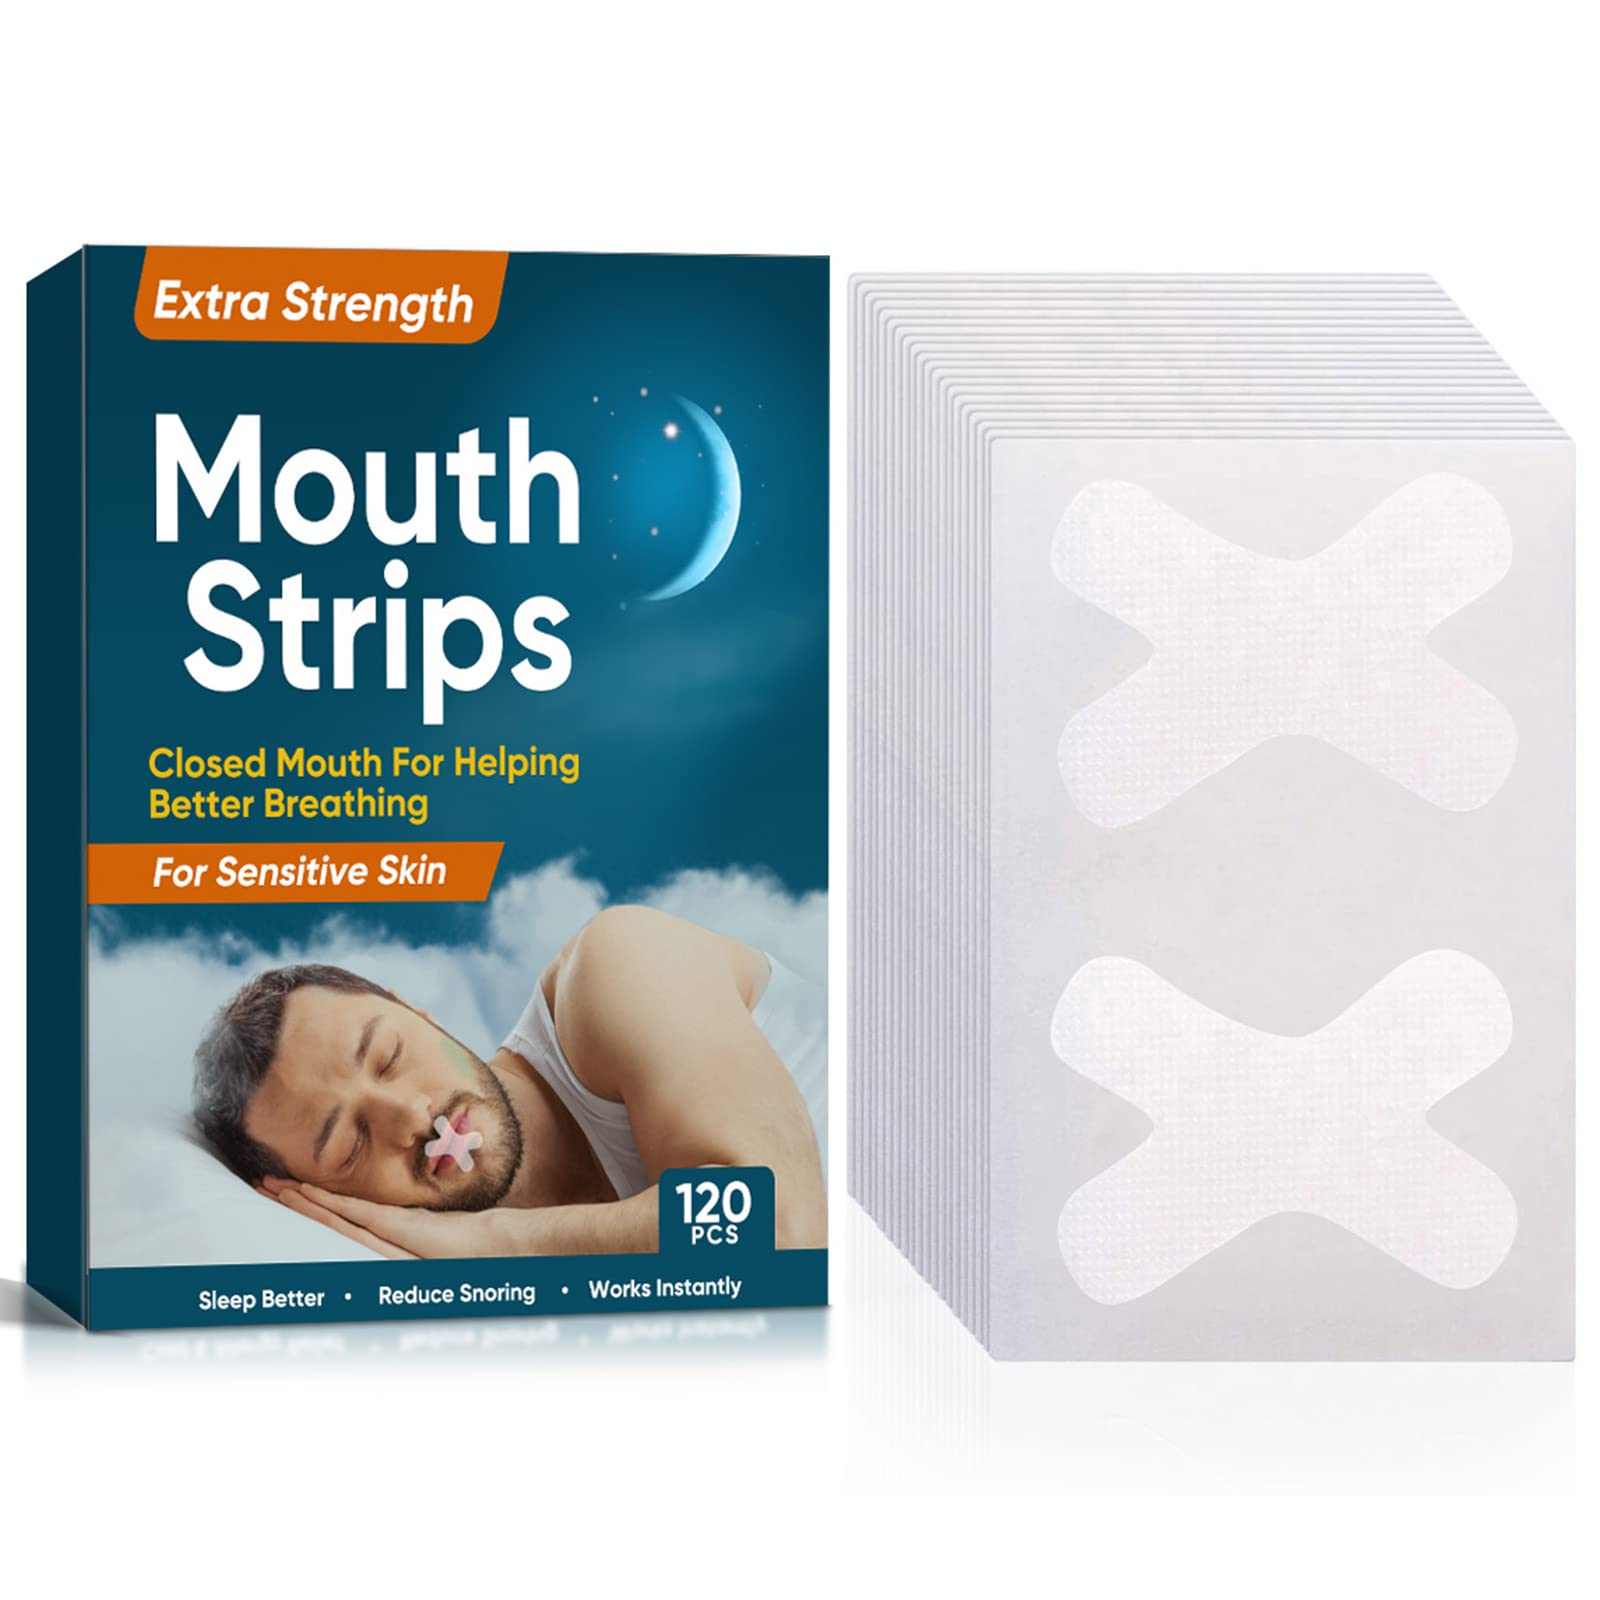 Want to Stop Snoring? Some People Swear by Taping Their Mouth Shut - CNET